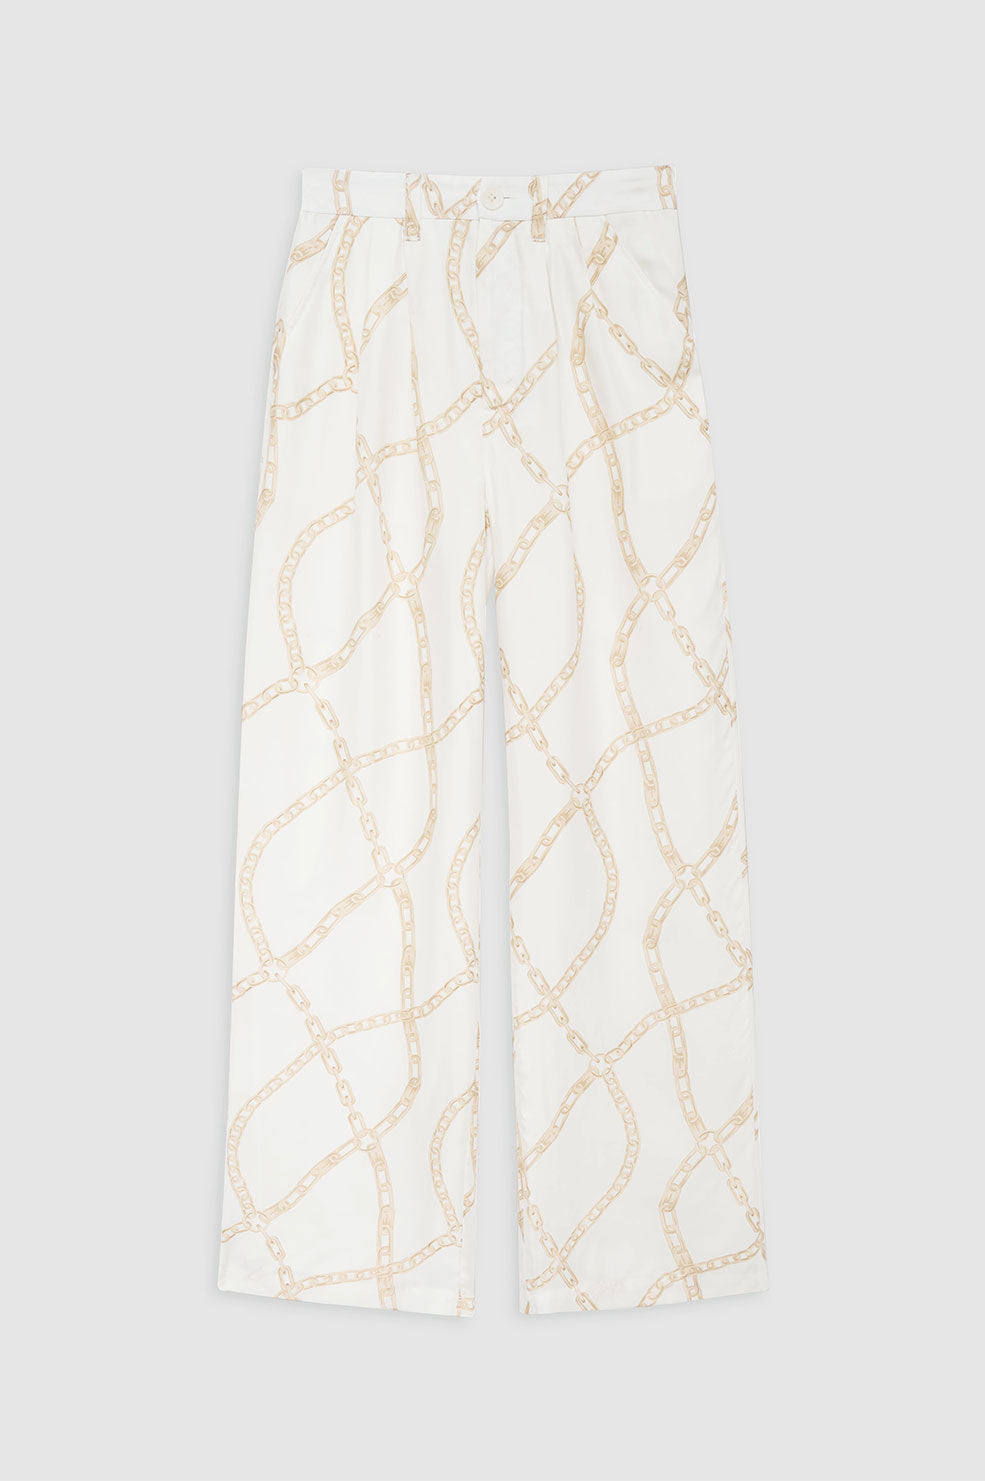 ANINE BING Carrie Pant - Cream And Tan Link Print - Front View